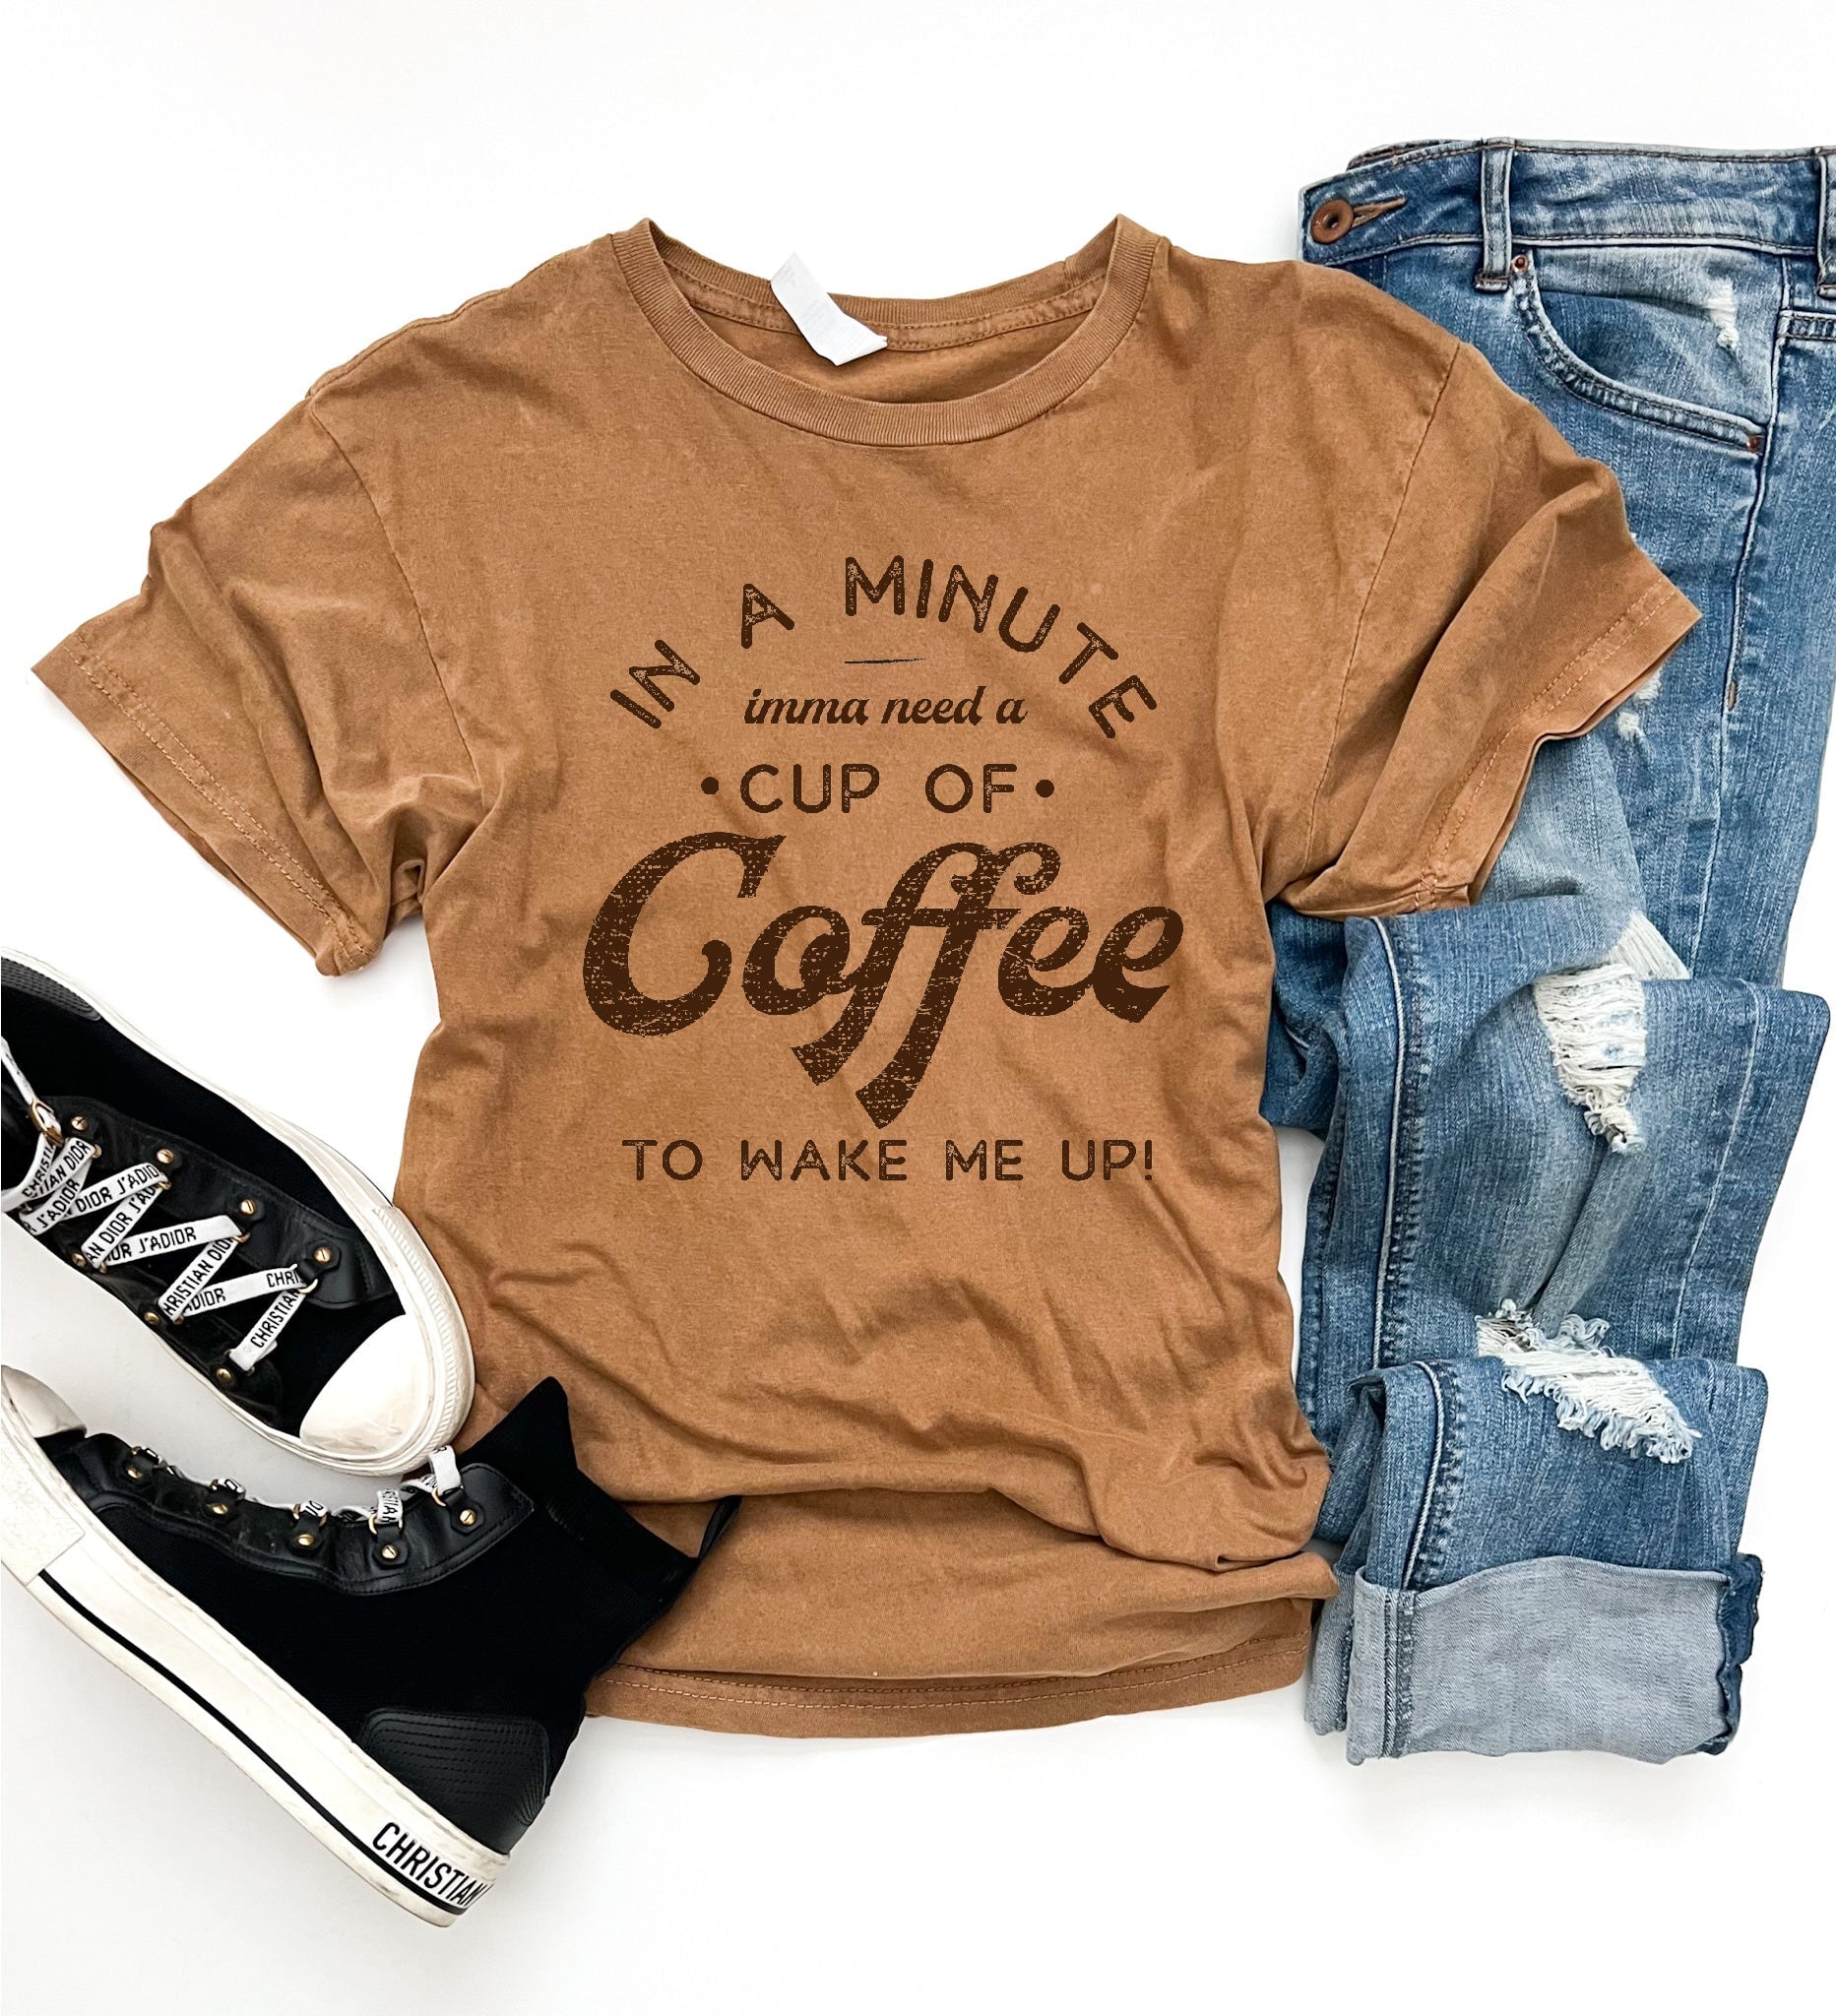 In a minute imma need a cup of coffee vintage wash tee Short sleeve miscellaneous tee Lane 7 15004 Camel 